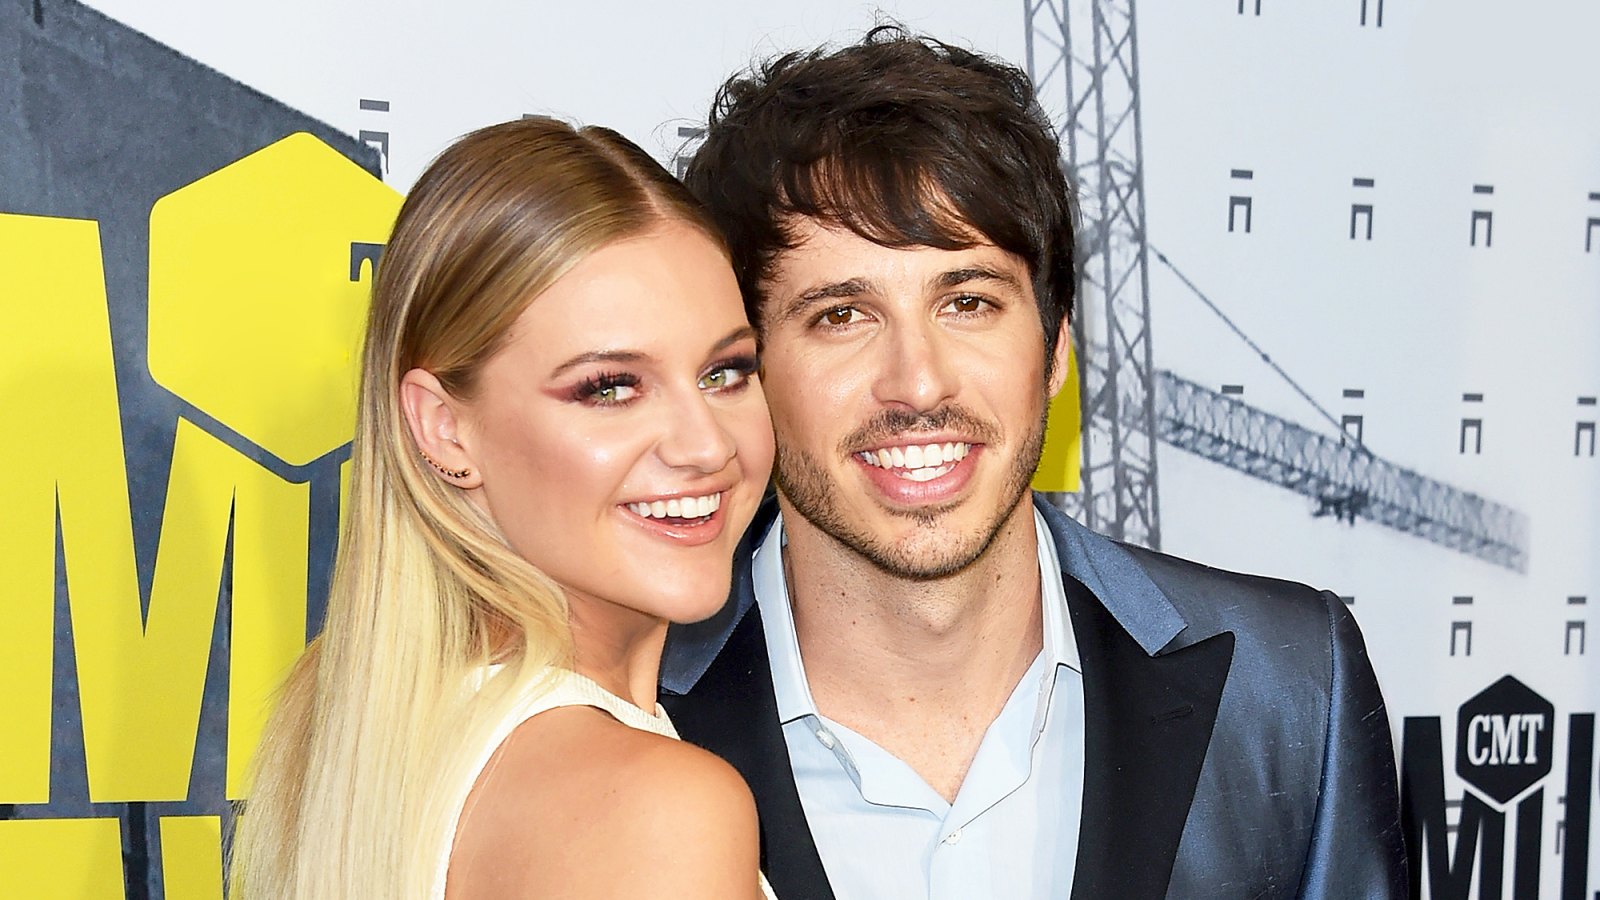 Kelsea Ballerini and Morgan Evans attend the 2017 CMT Music Awards at the Music City Center in Nashville, Tennessee.